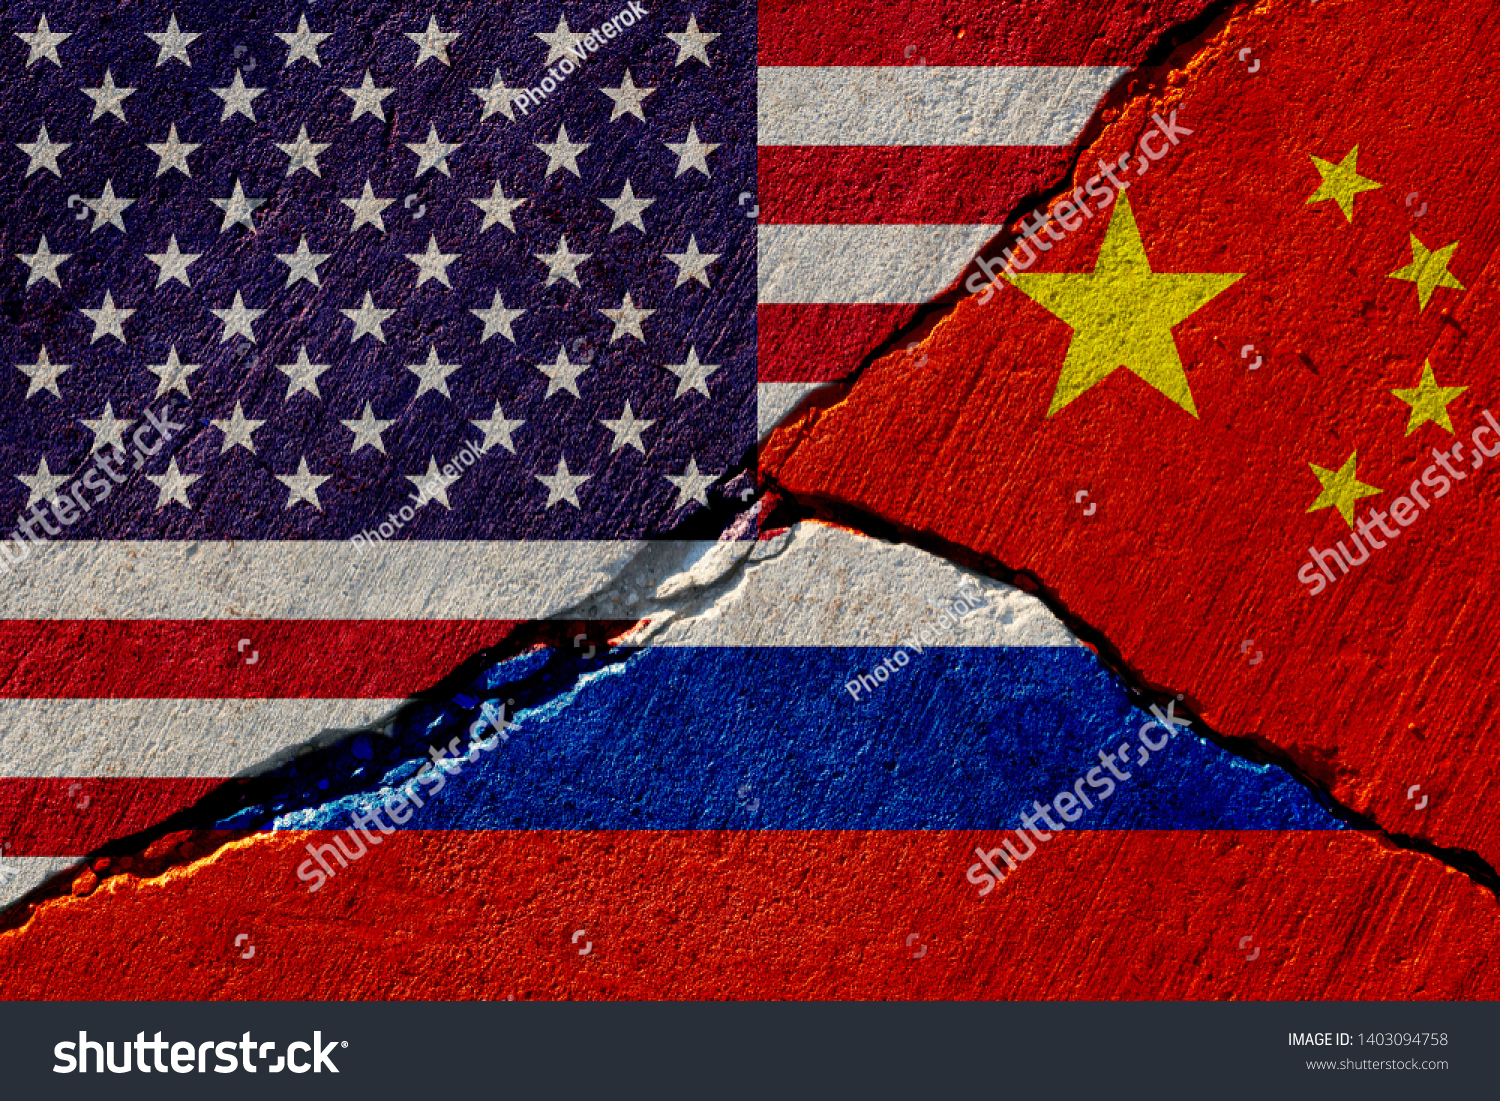 concrete wall with painted united states, china and russia flags #1403094758